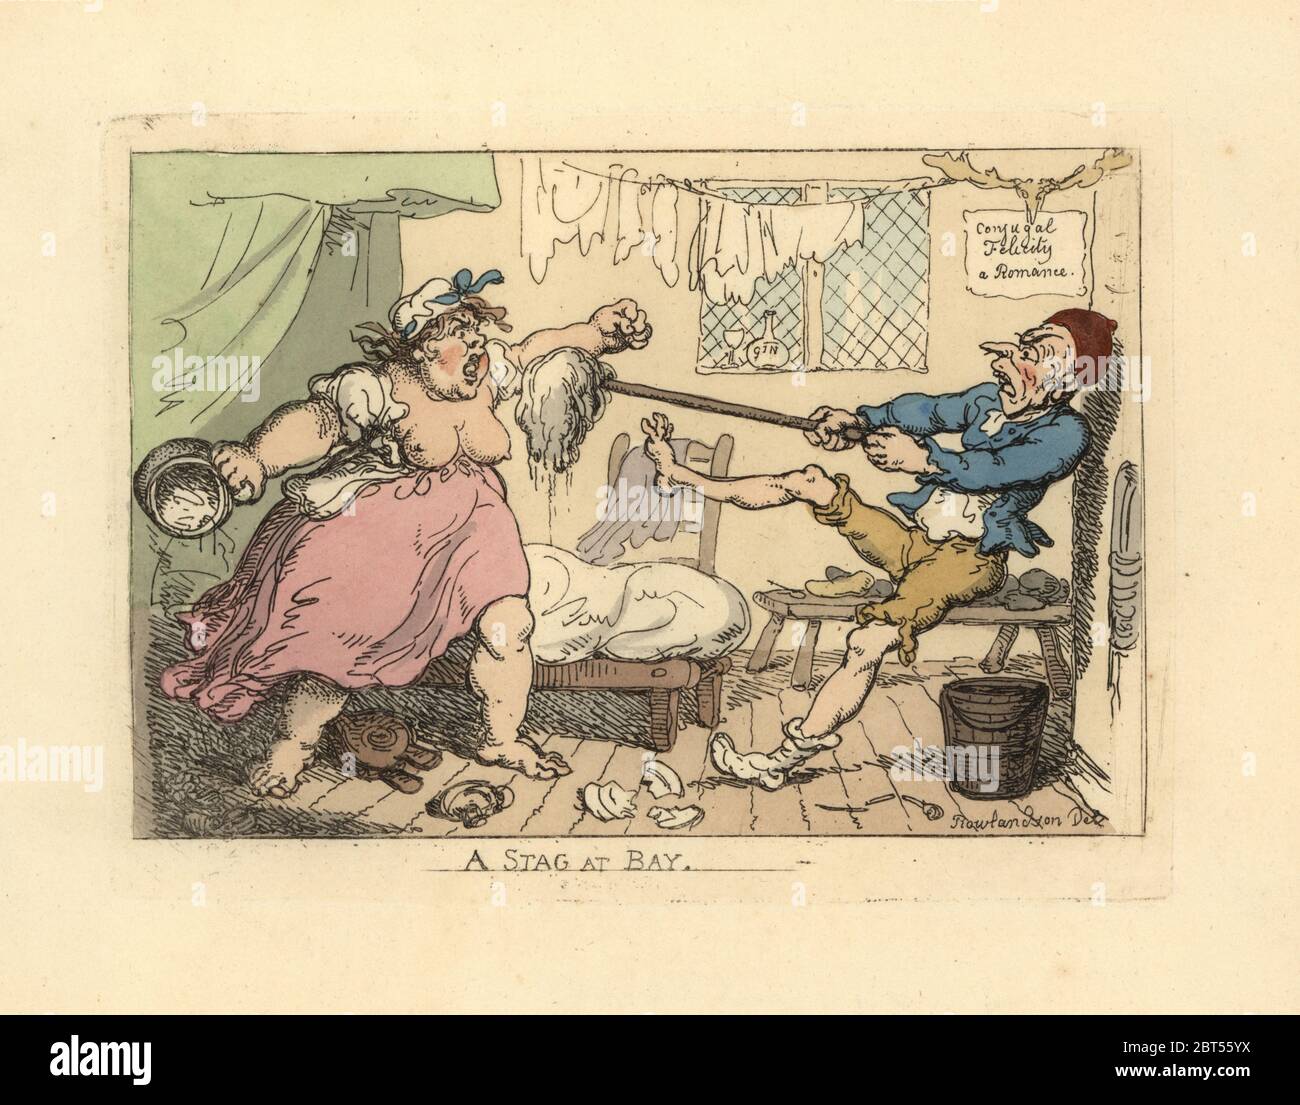 Husband holding off his angry wife with mop. A bottle of gin on the windowsill and a sign reading Conjugal Felicity a Romance. A Stag at Bay. Handcoloured copperplate engraving designed and etched by Thomas Rowlandson to accompany Reverend James Beresfords Miseries of Human Life, Ackermann, 1808. Stock Photo